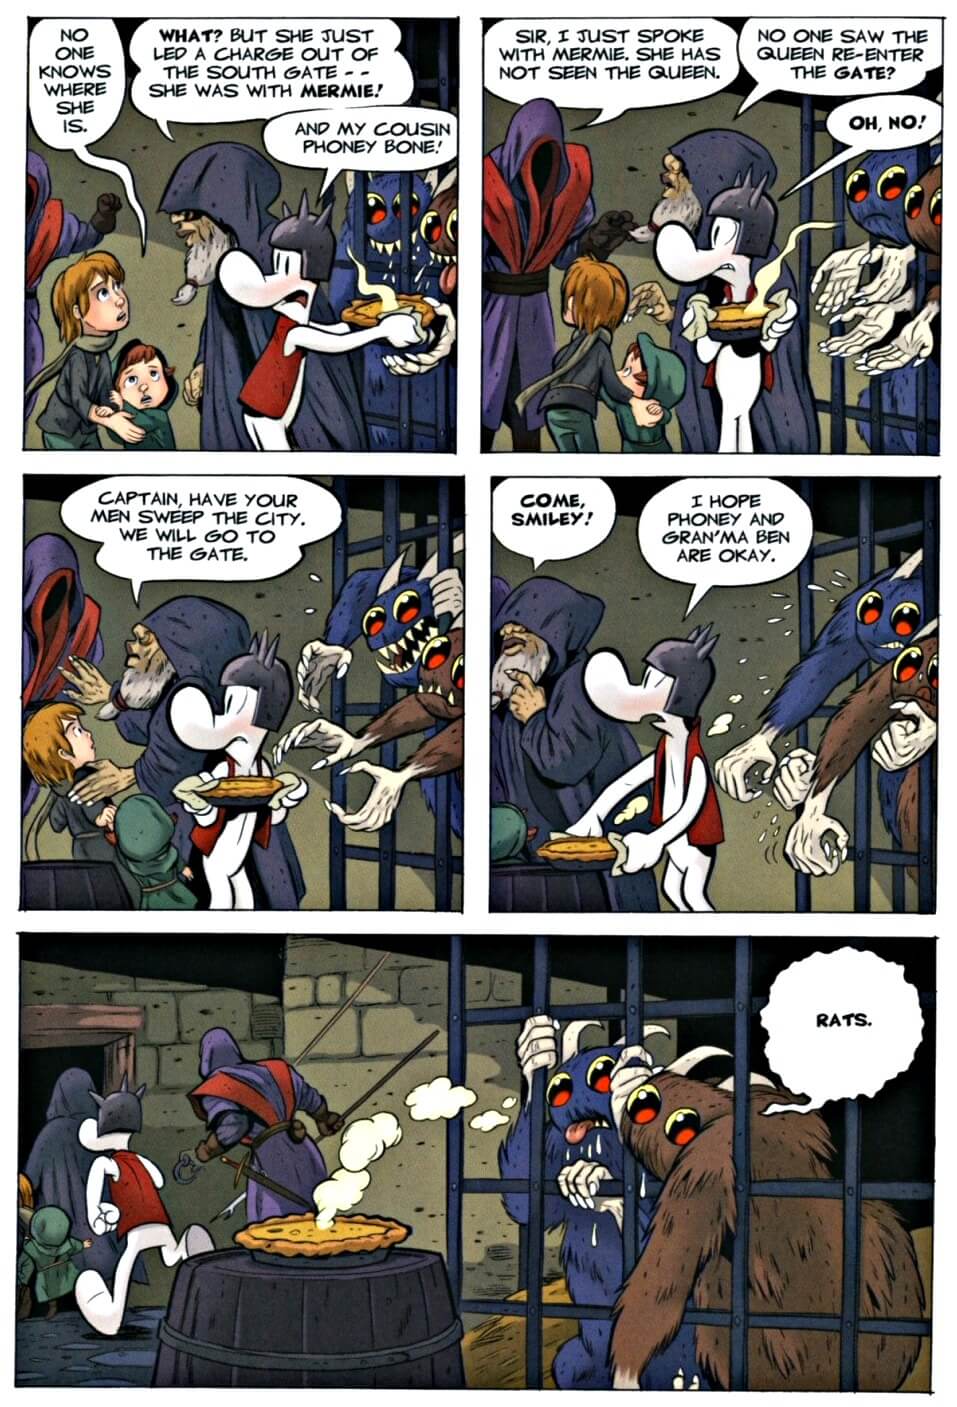 page 120 chapter 5 of bone 9 crown of horns graphic novel